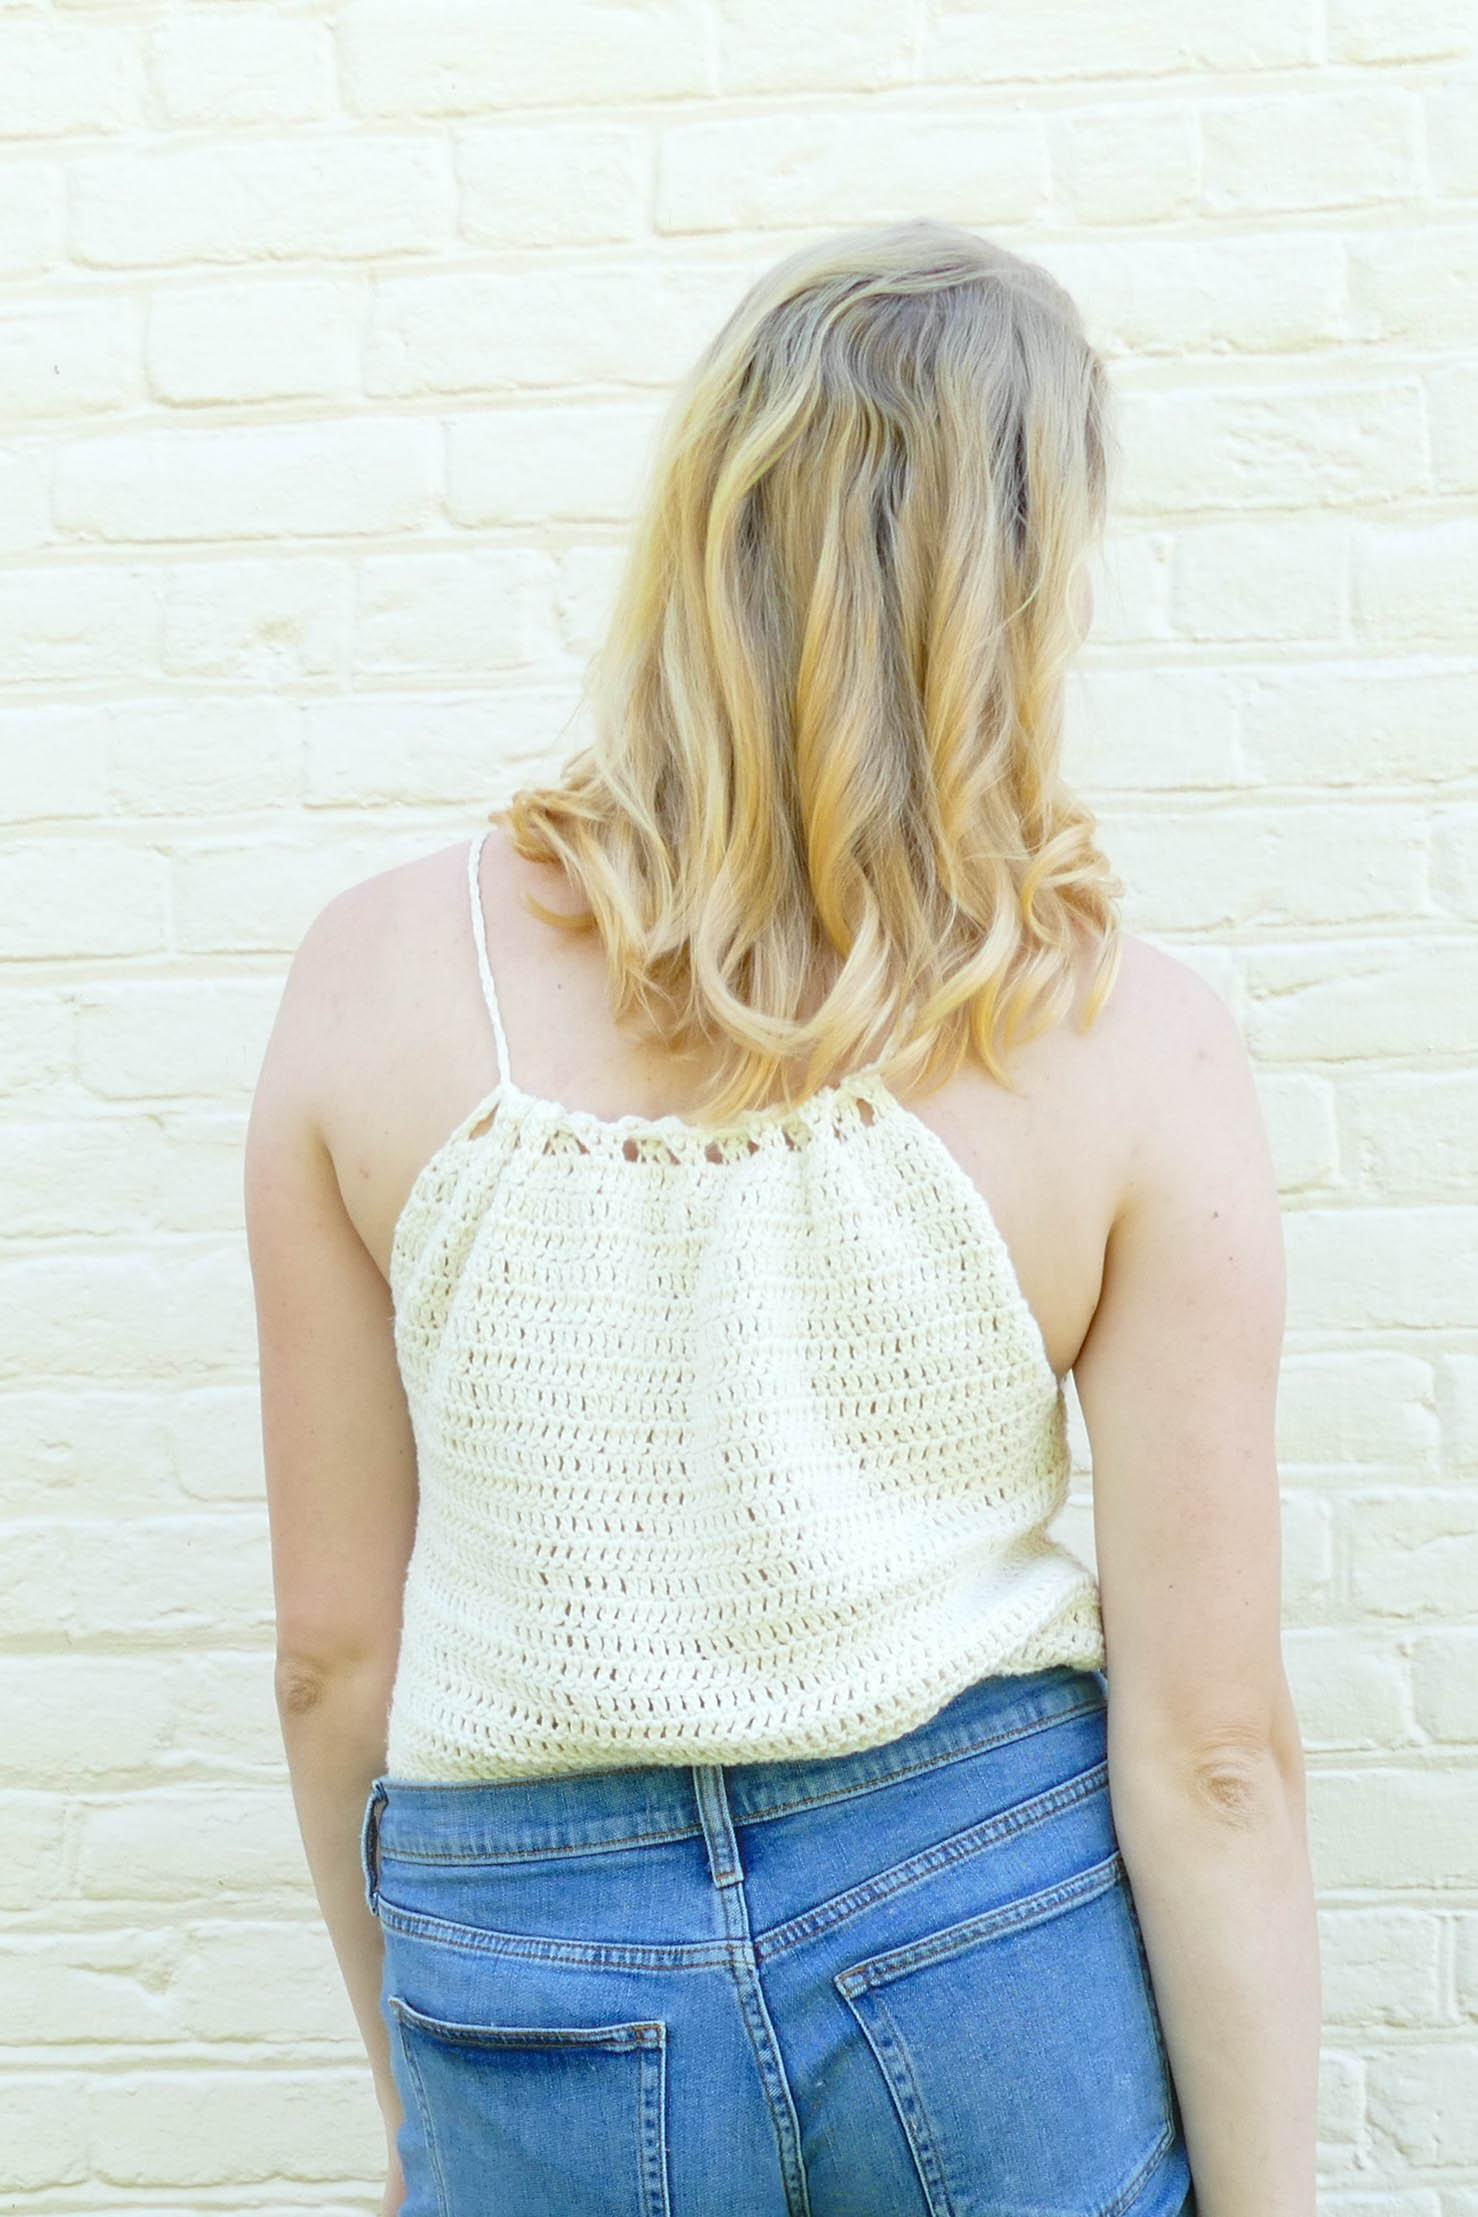 A blonde woman stands against a white brick wall with her back to the camera. She is wearing jean shorts and a white crochet tank top.